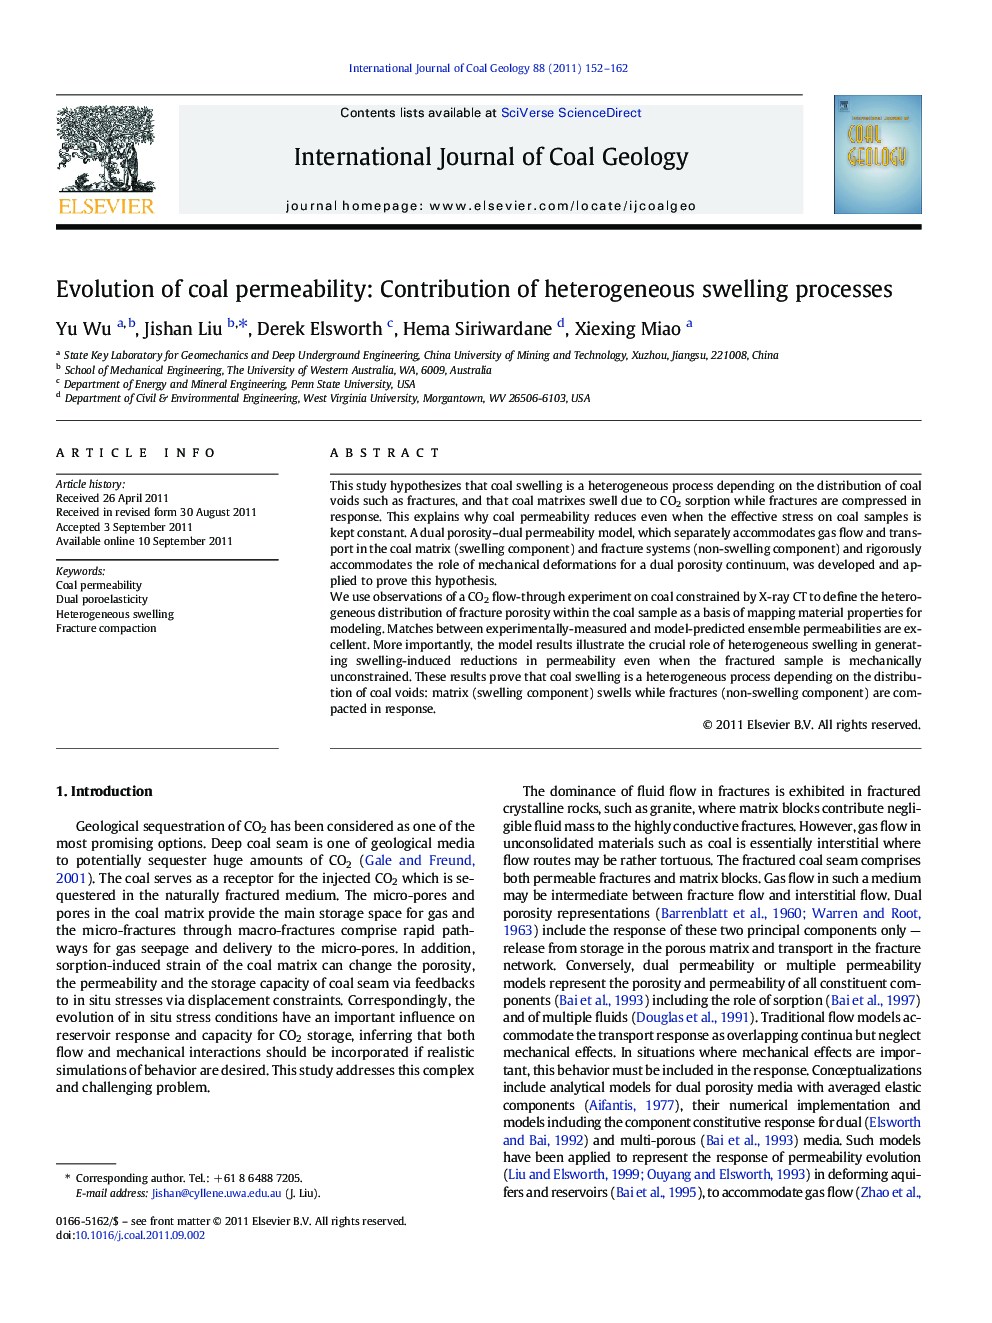 Evolution of coal permeability: Contribution of heterogeneous swelling processes